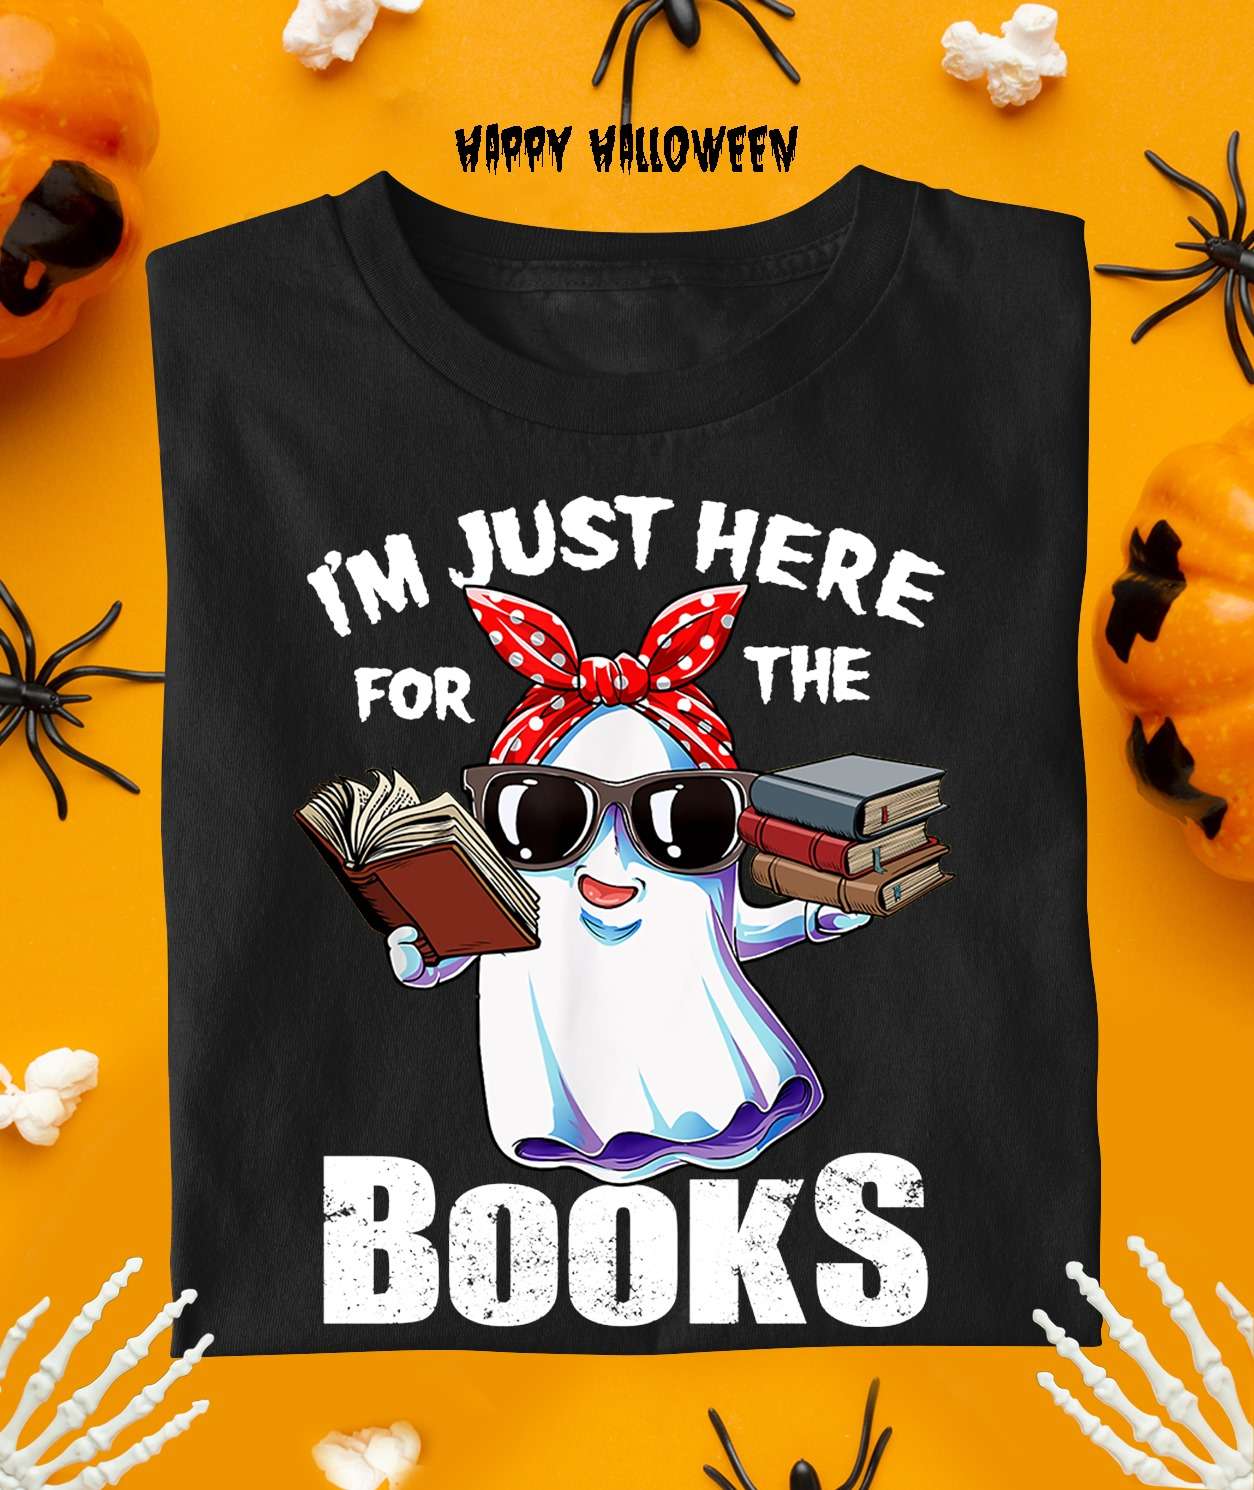 I'm just here for the books - White boo and books, white boo reading books, Halloween gift for bookaholic